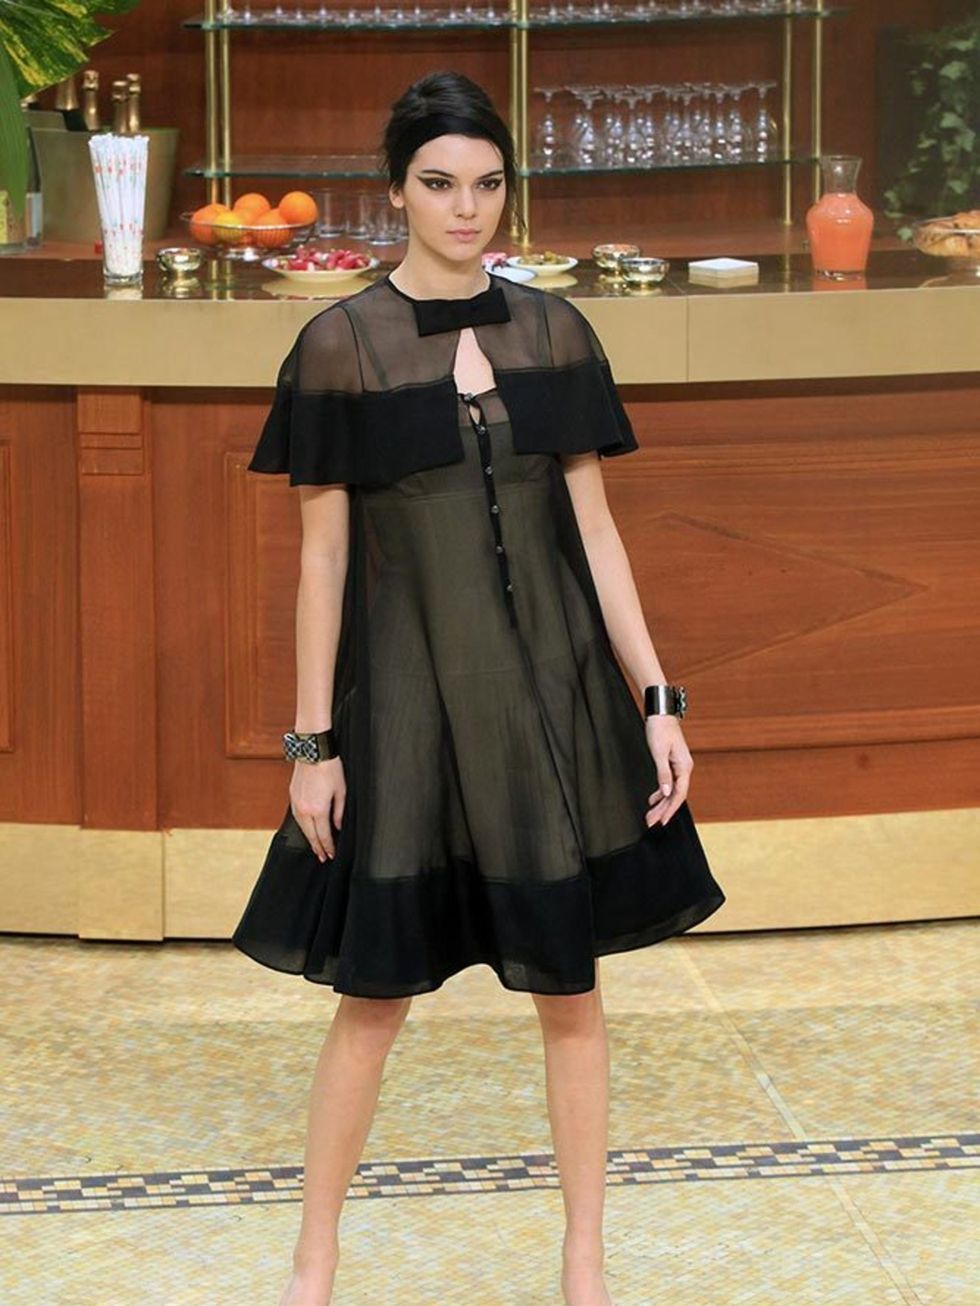 Kendall's final look during the Chanel a/w15 show, March 2015.